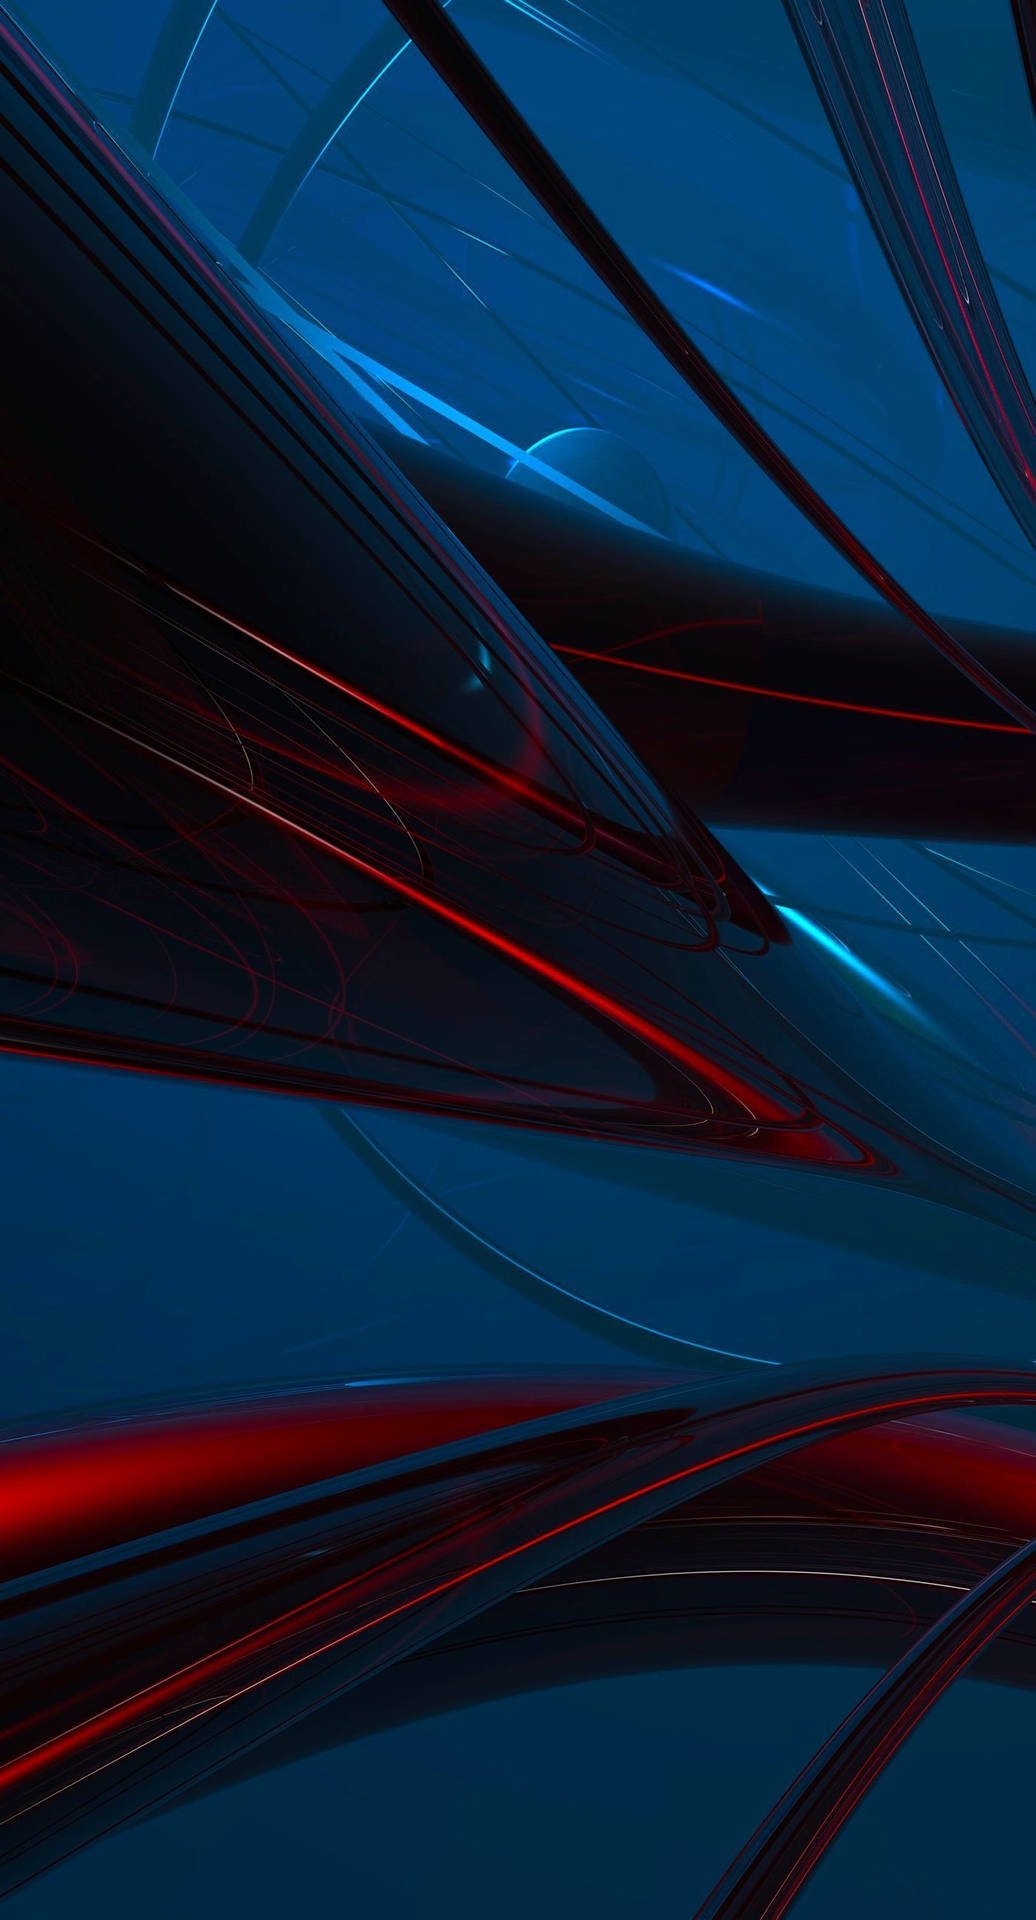 A Blue And Red Abstract Background Wallpaper